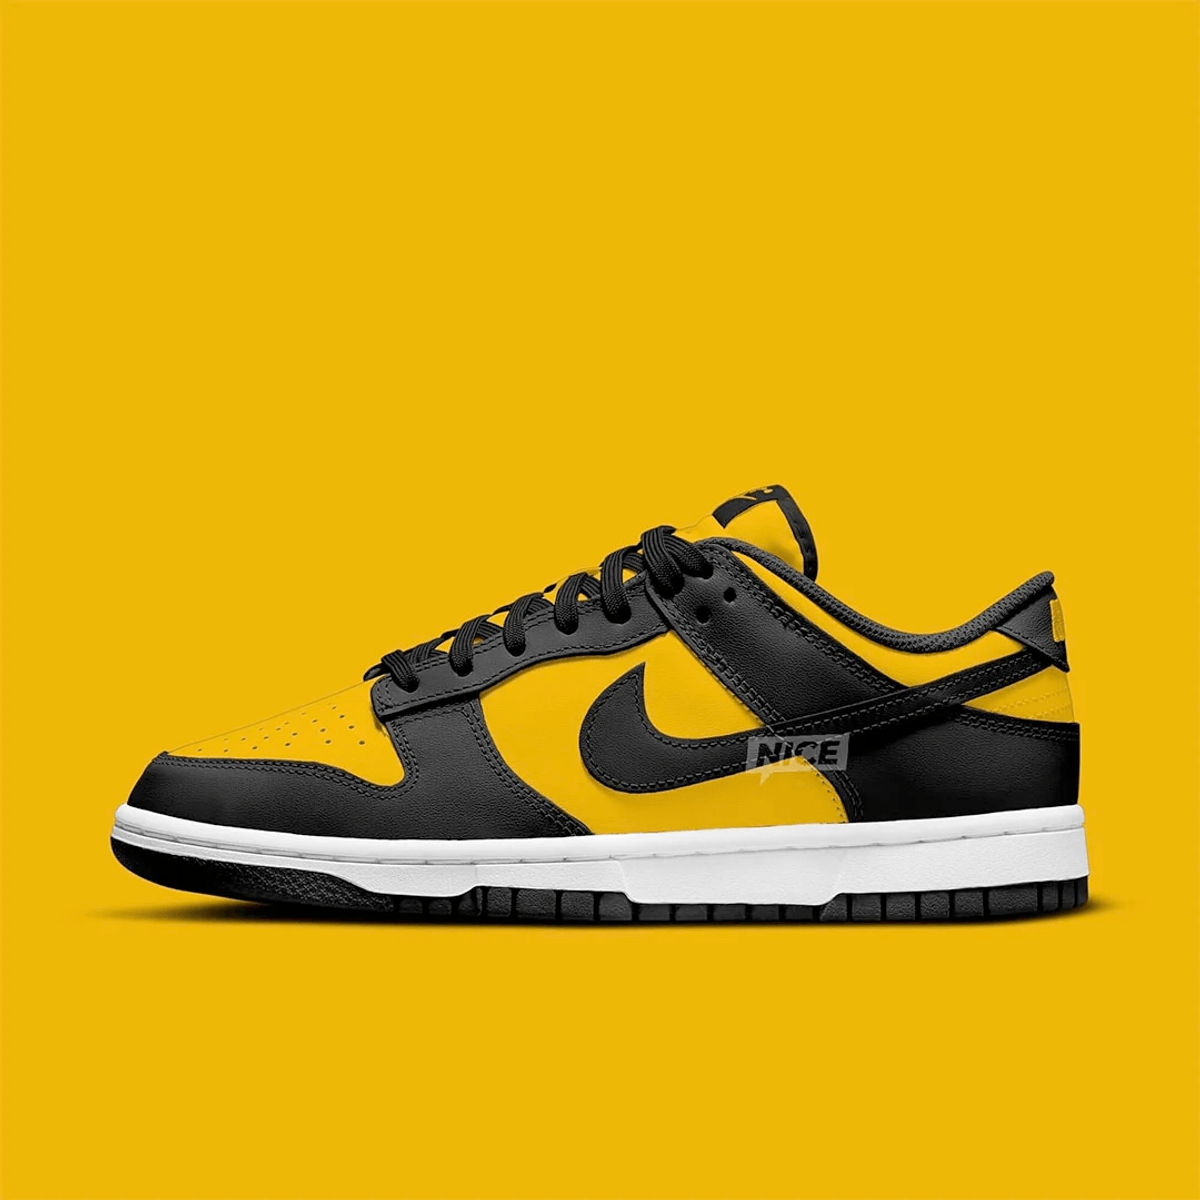 University Gold Is Coming To The Nike Dunk Low